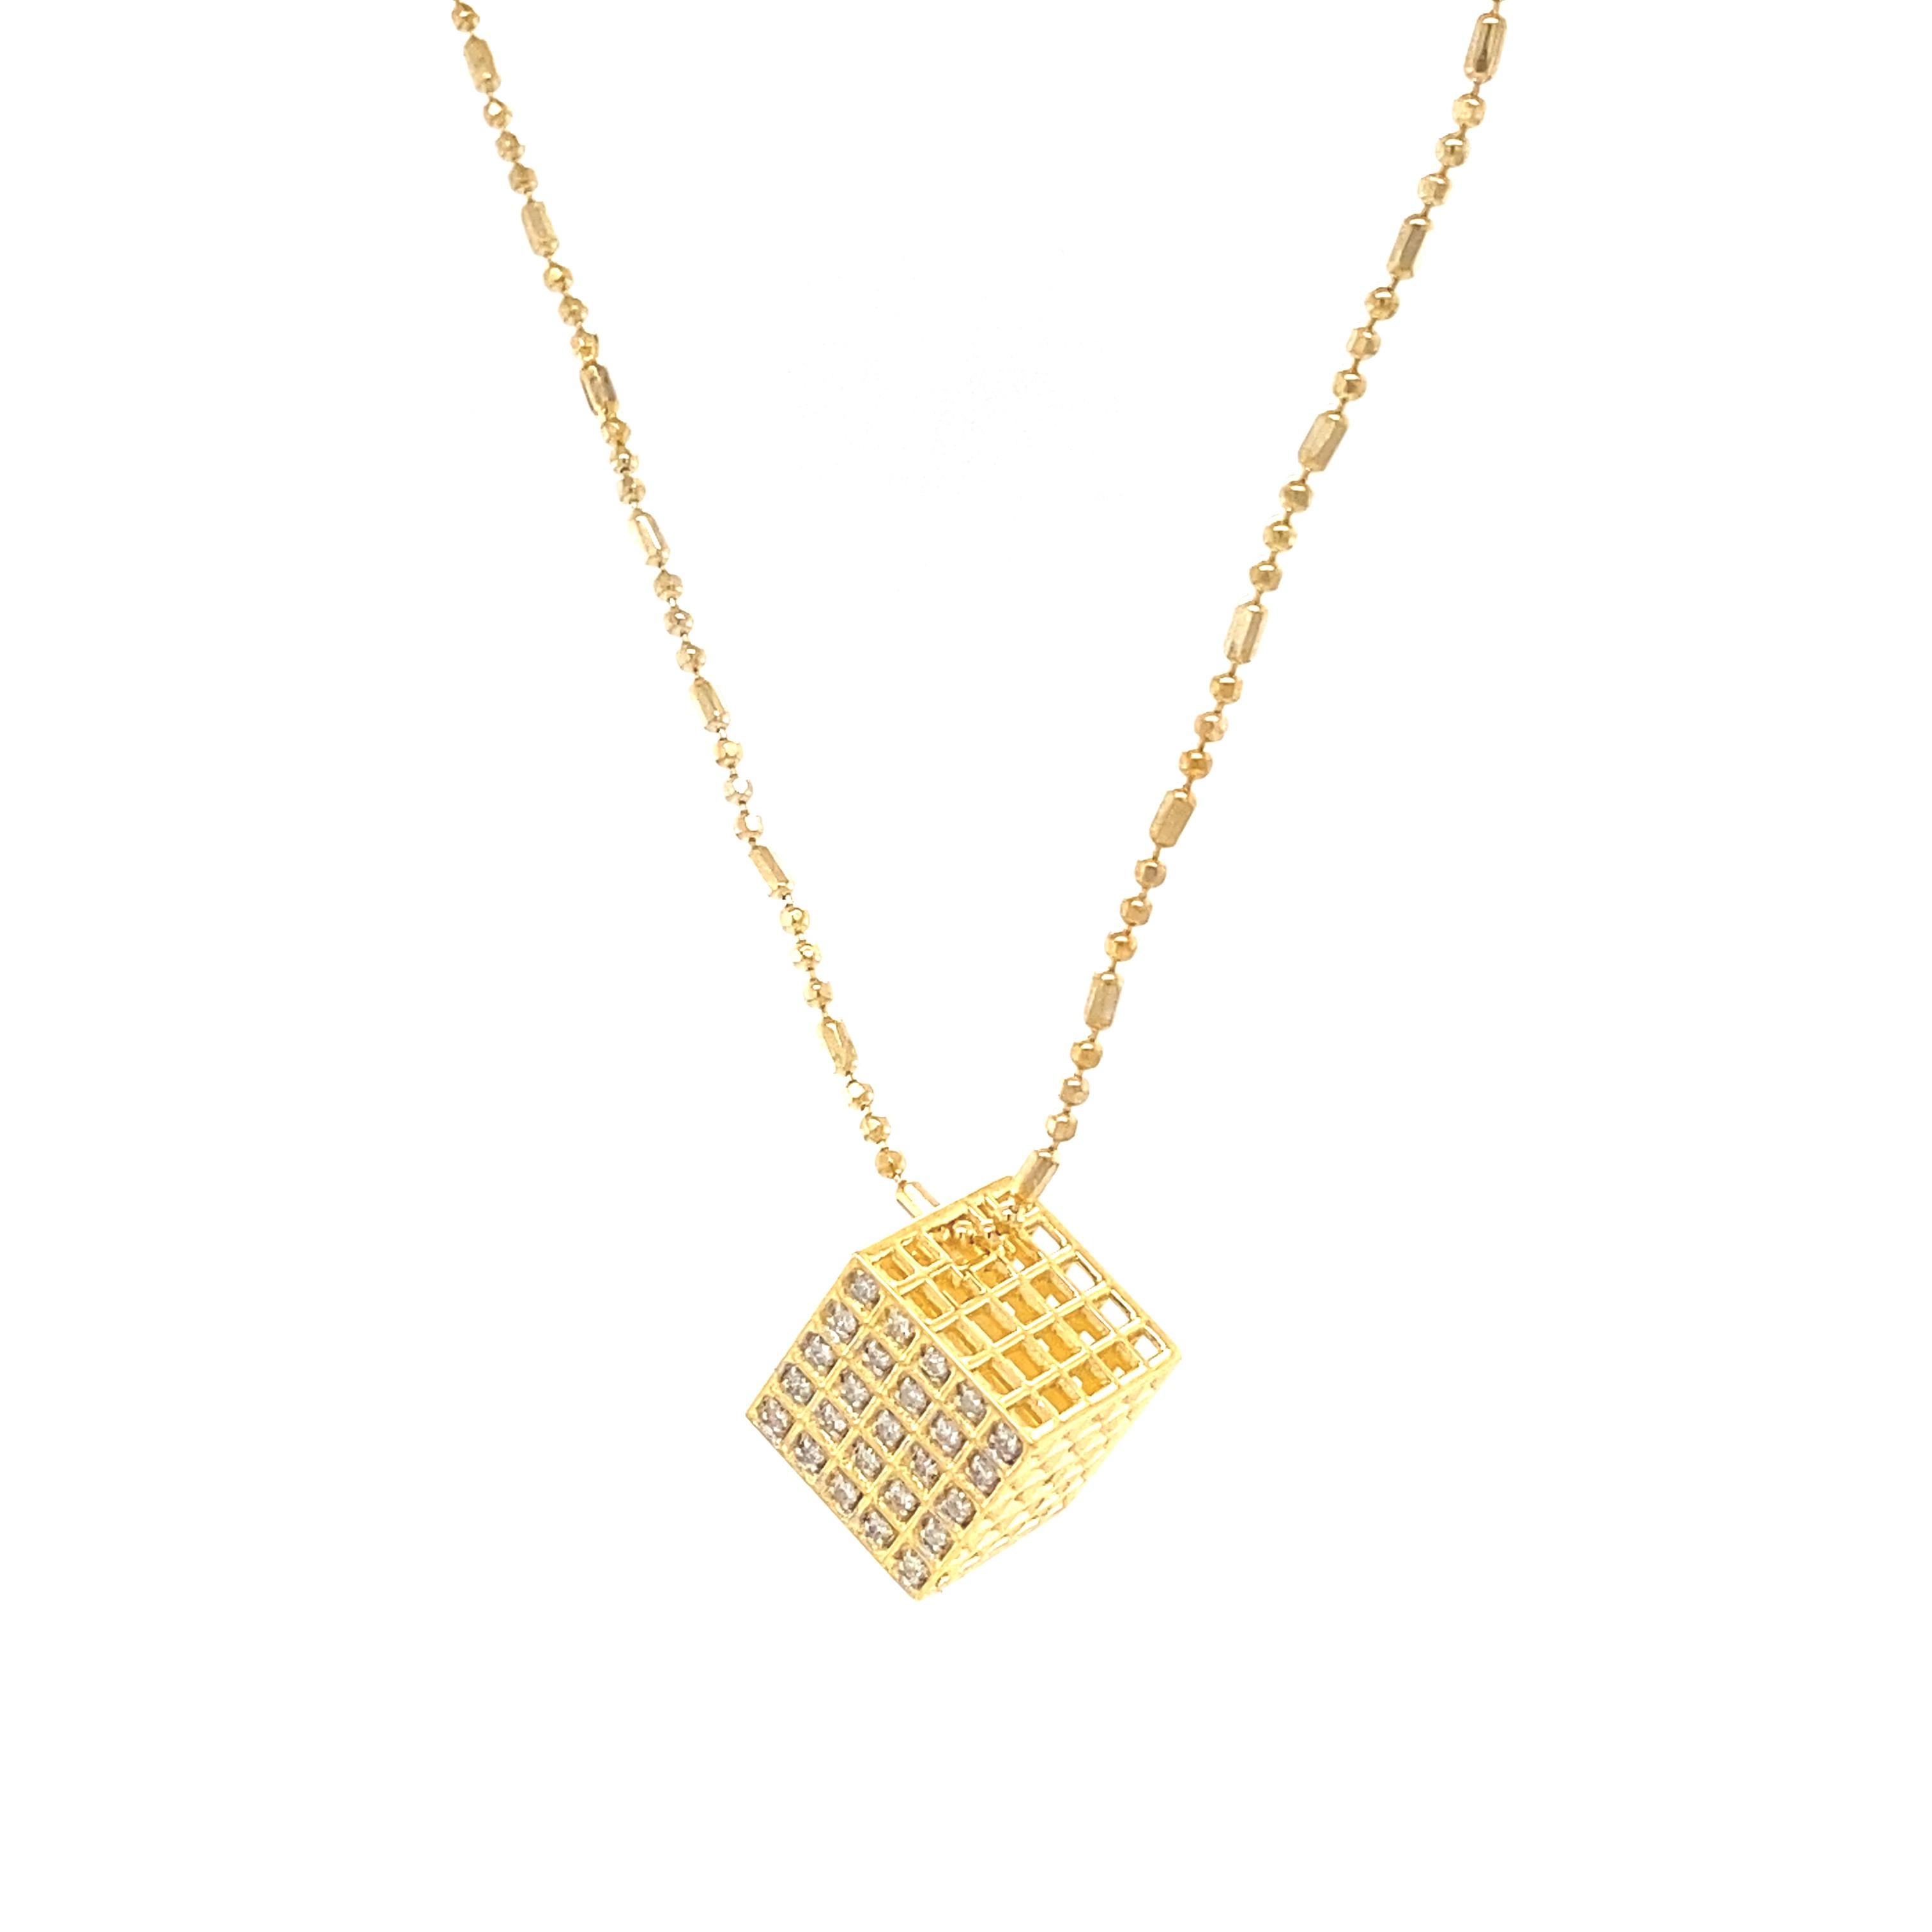 The pendant is a diamond-shaped cube design crafted in gold, adorned with multiple small, sparkling diamonds, arranged in a grid pattern that fills the one face of the cube. This piece would make a striking addition to the 1st Dibs listings,